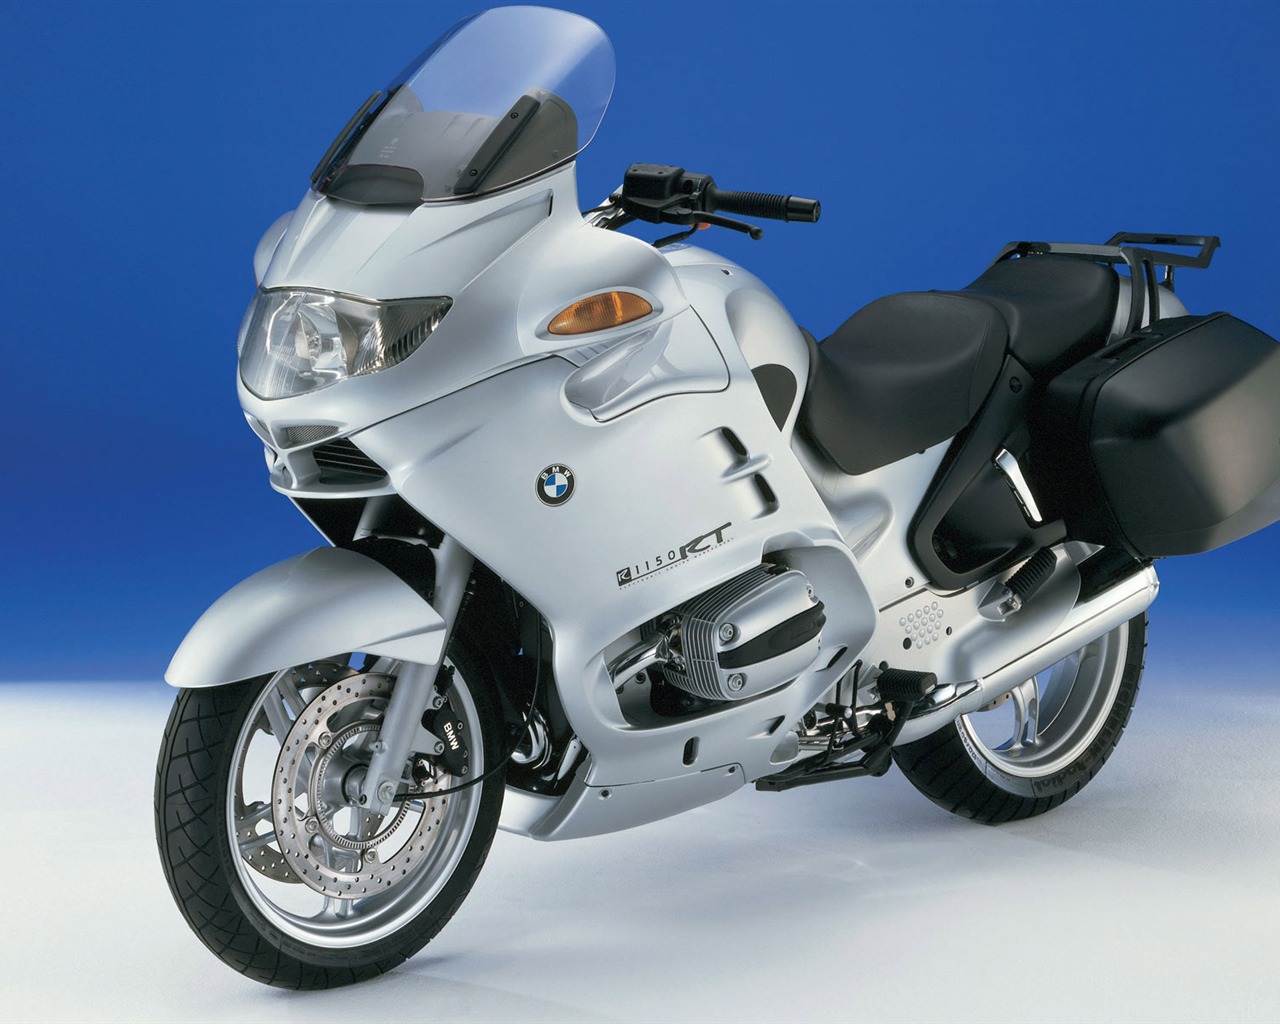 BMW motorcycle wallpapers (1) #12 - 1280x1024